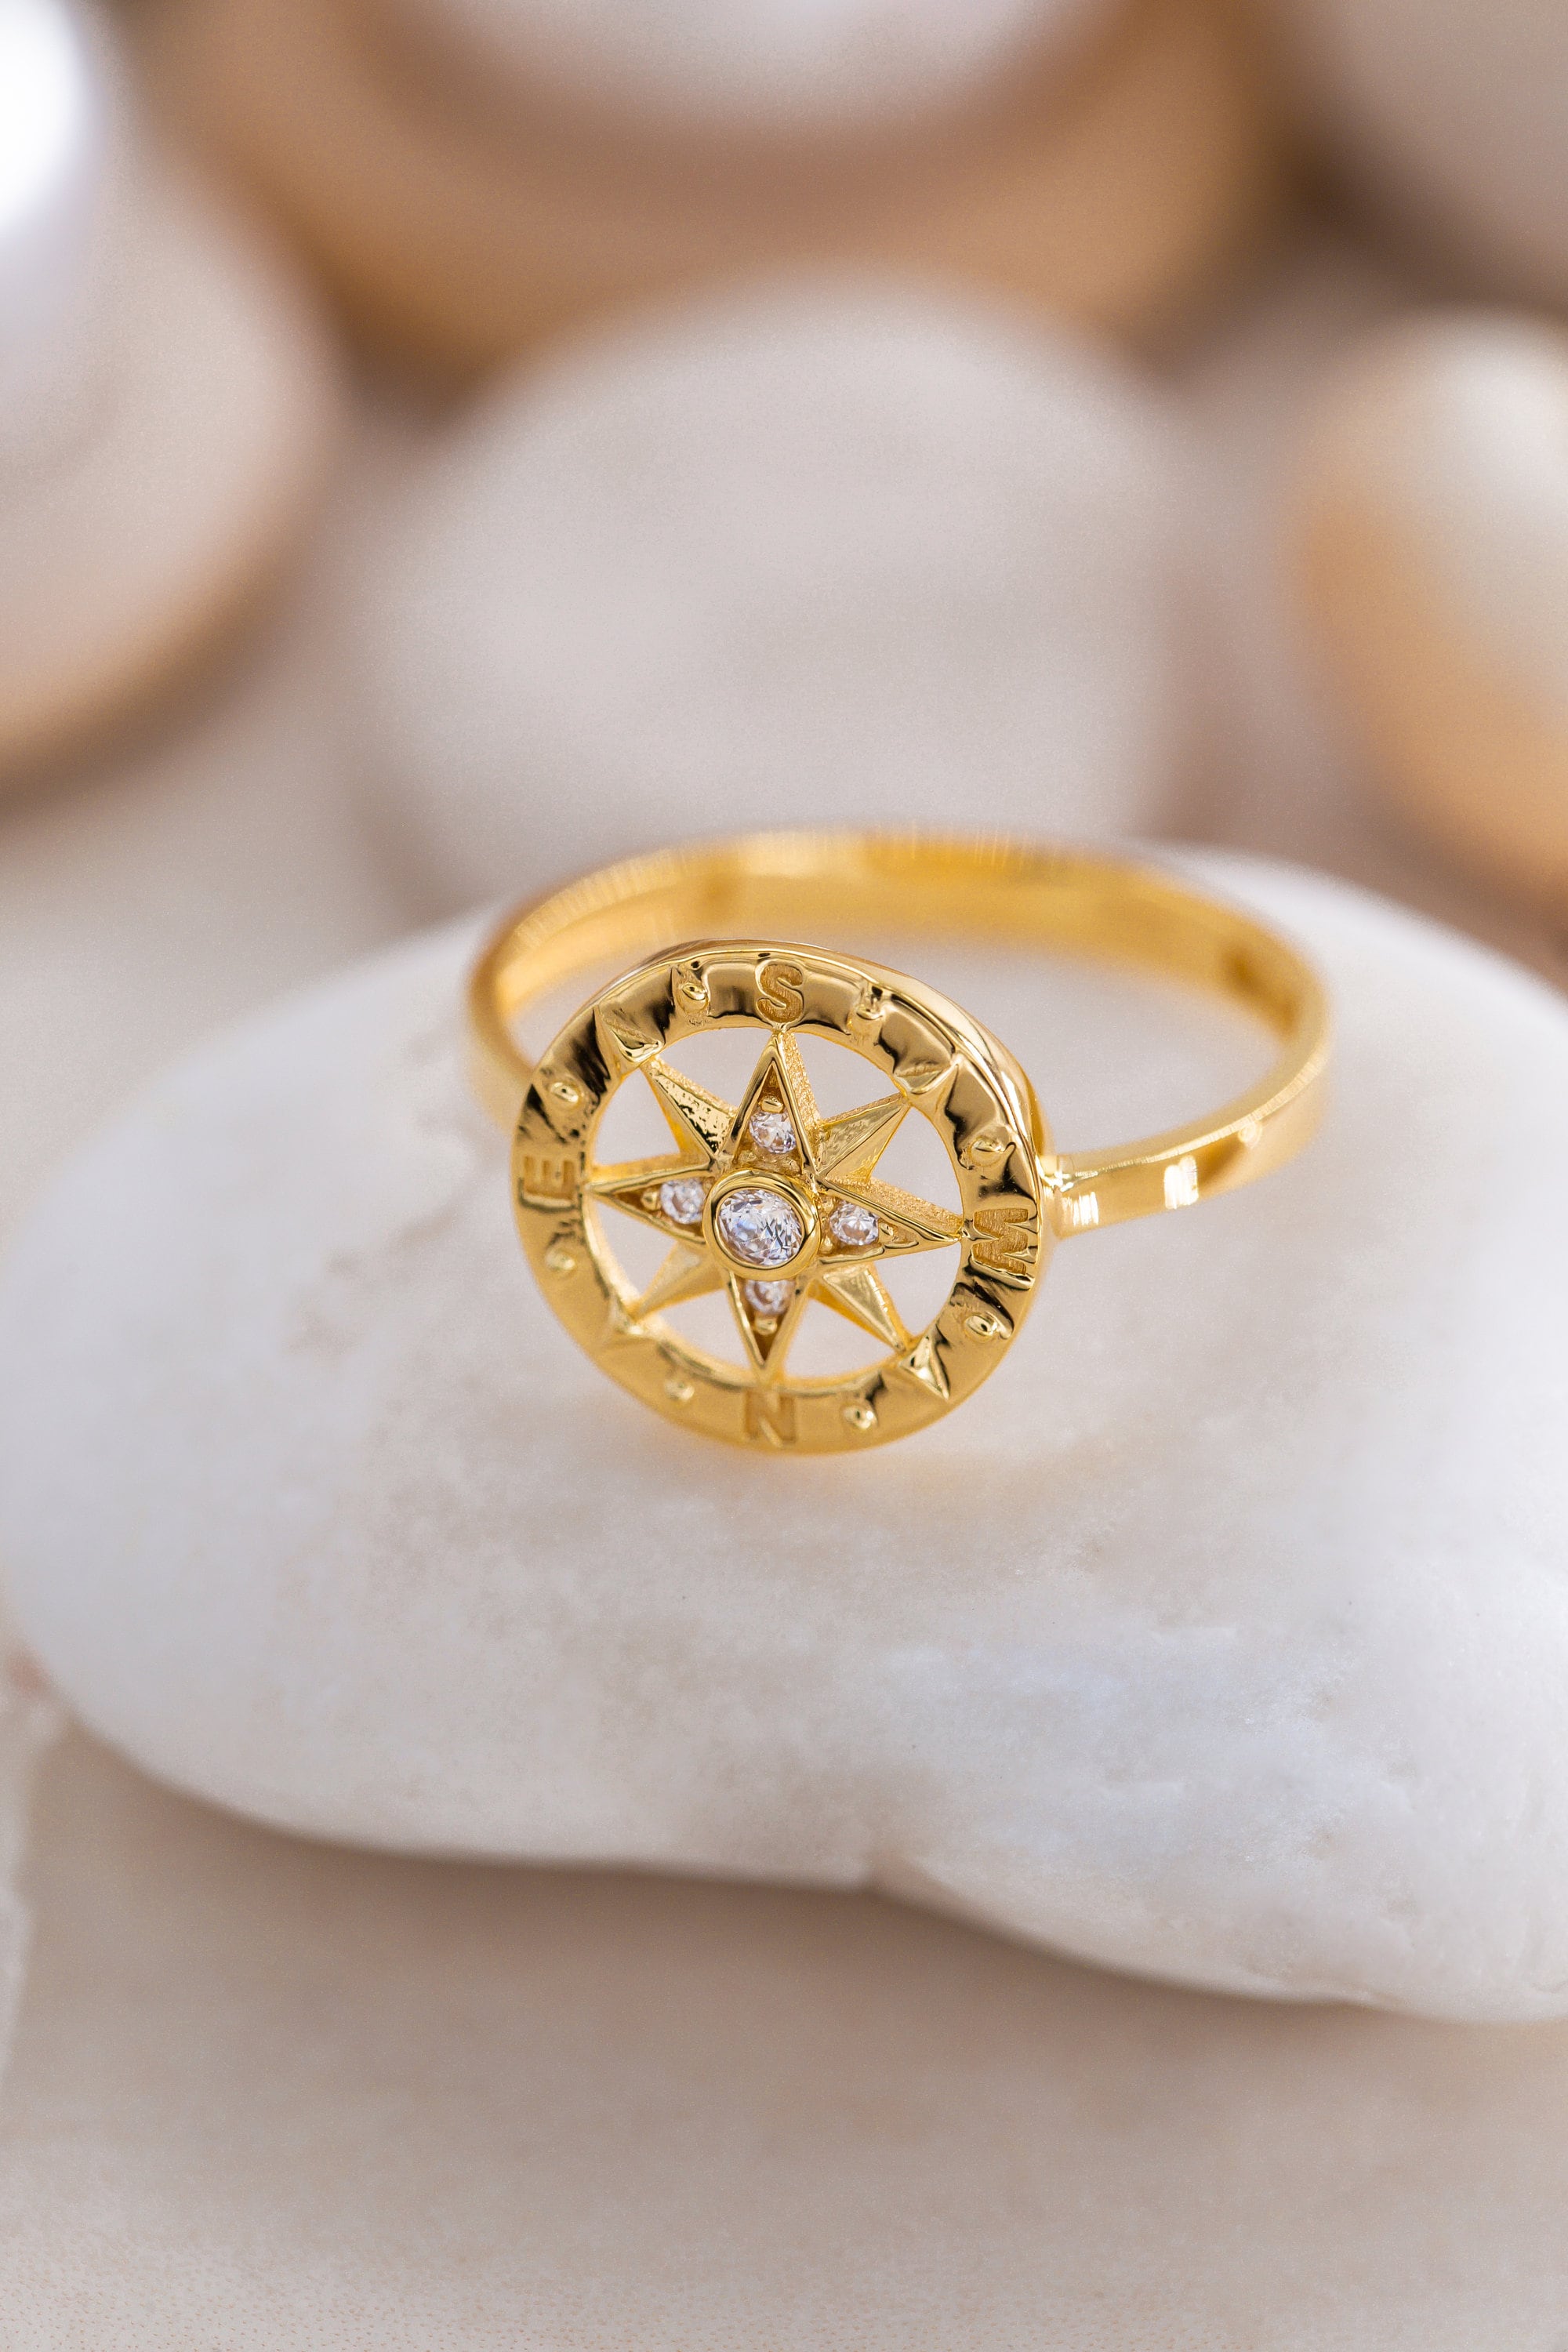 14K Golden North Star Ring / Golden North Star Design Ring/Star Ring For Her/North Star Gift/North Star Minimalist Ring/Gift For Mother Day